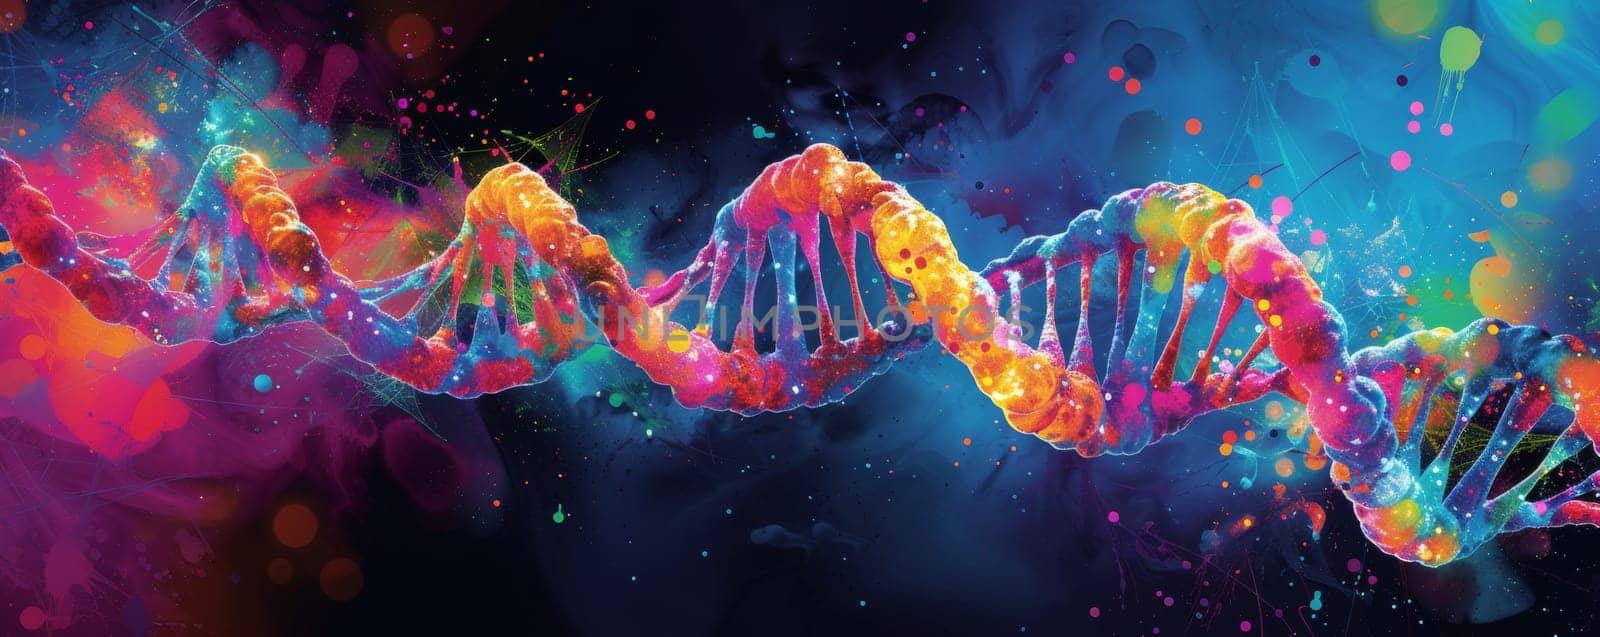 DNA Structure on Abstract Background by Anastasiia